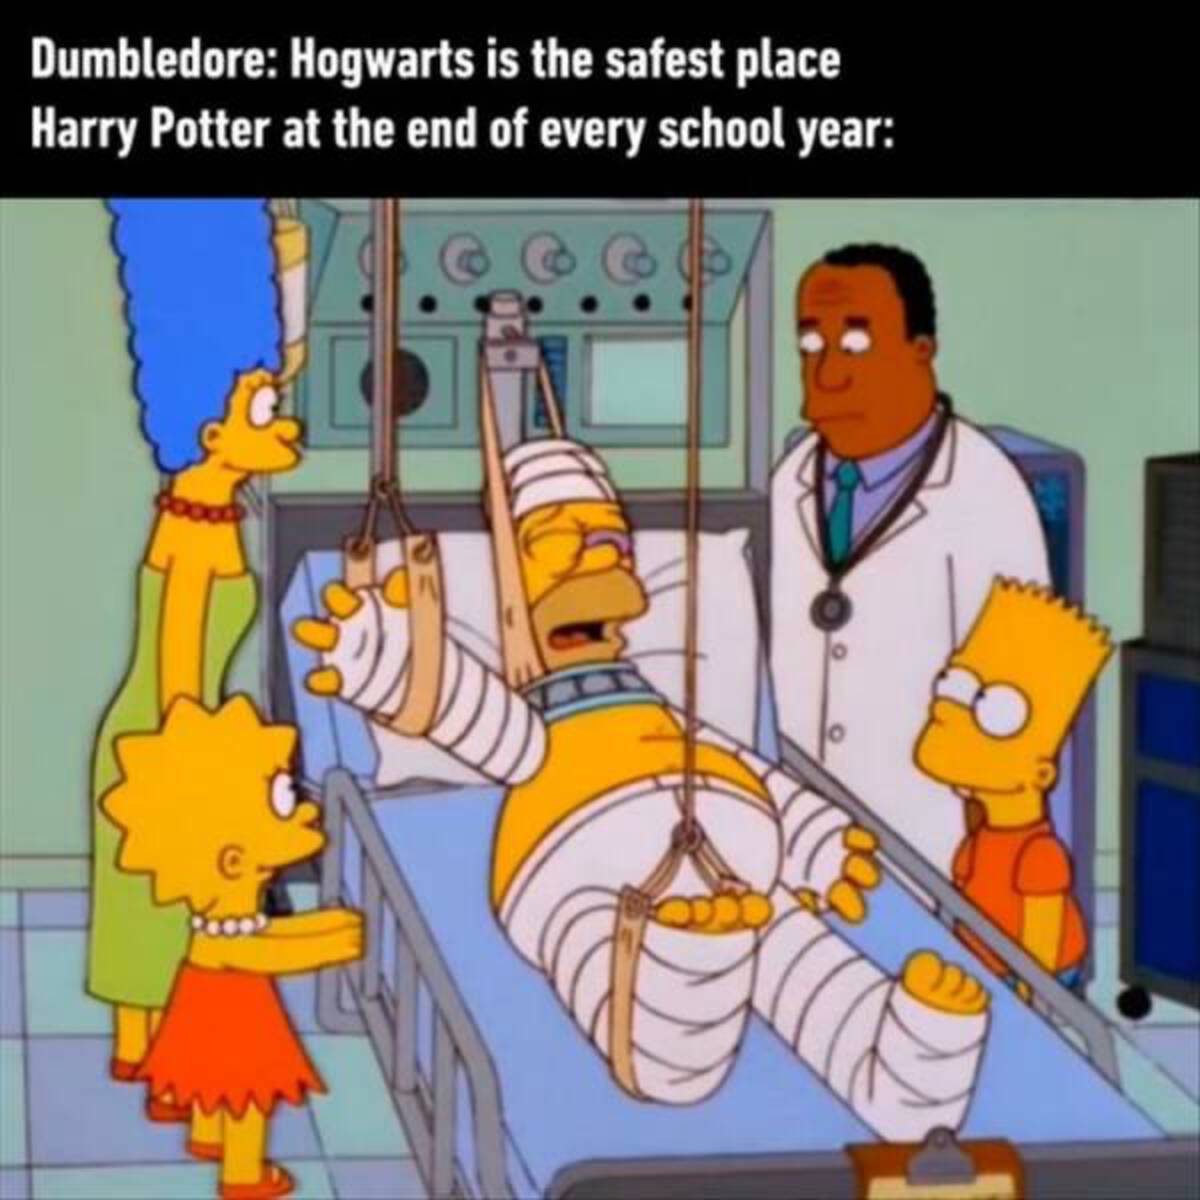 hogwarts the safest place - Dumbledore Hogwarts is the safest place Harry Potter at the end of every school year